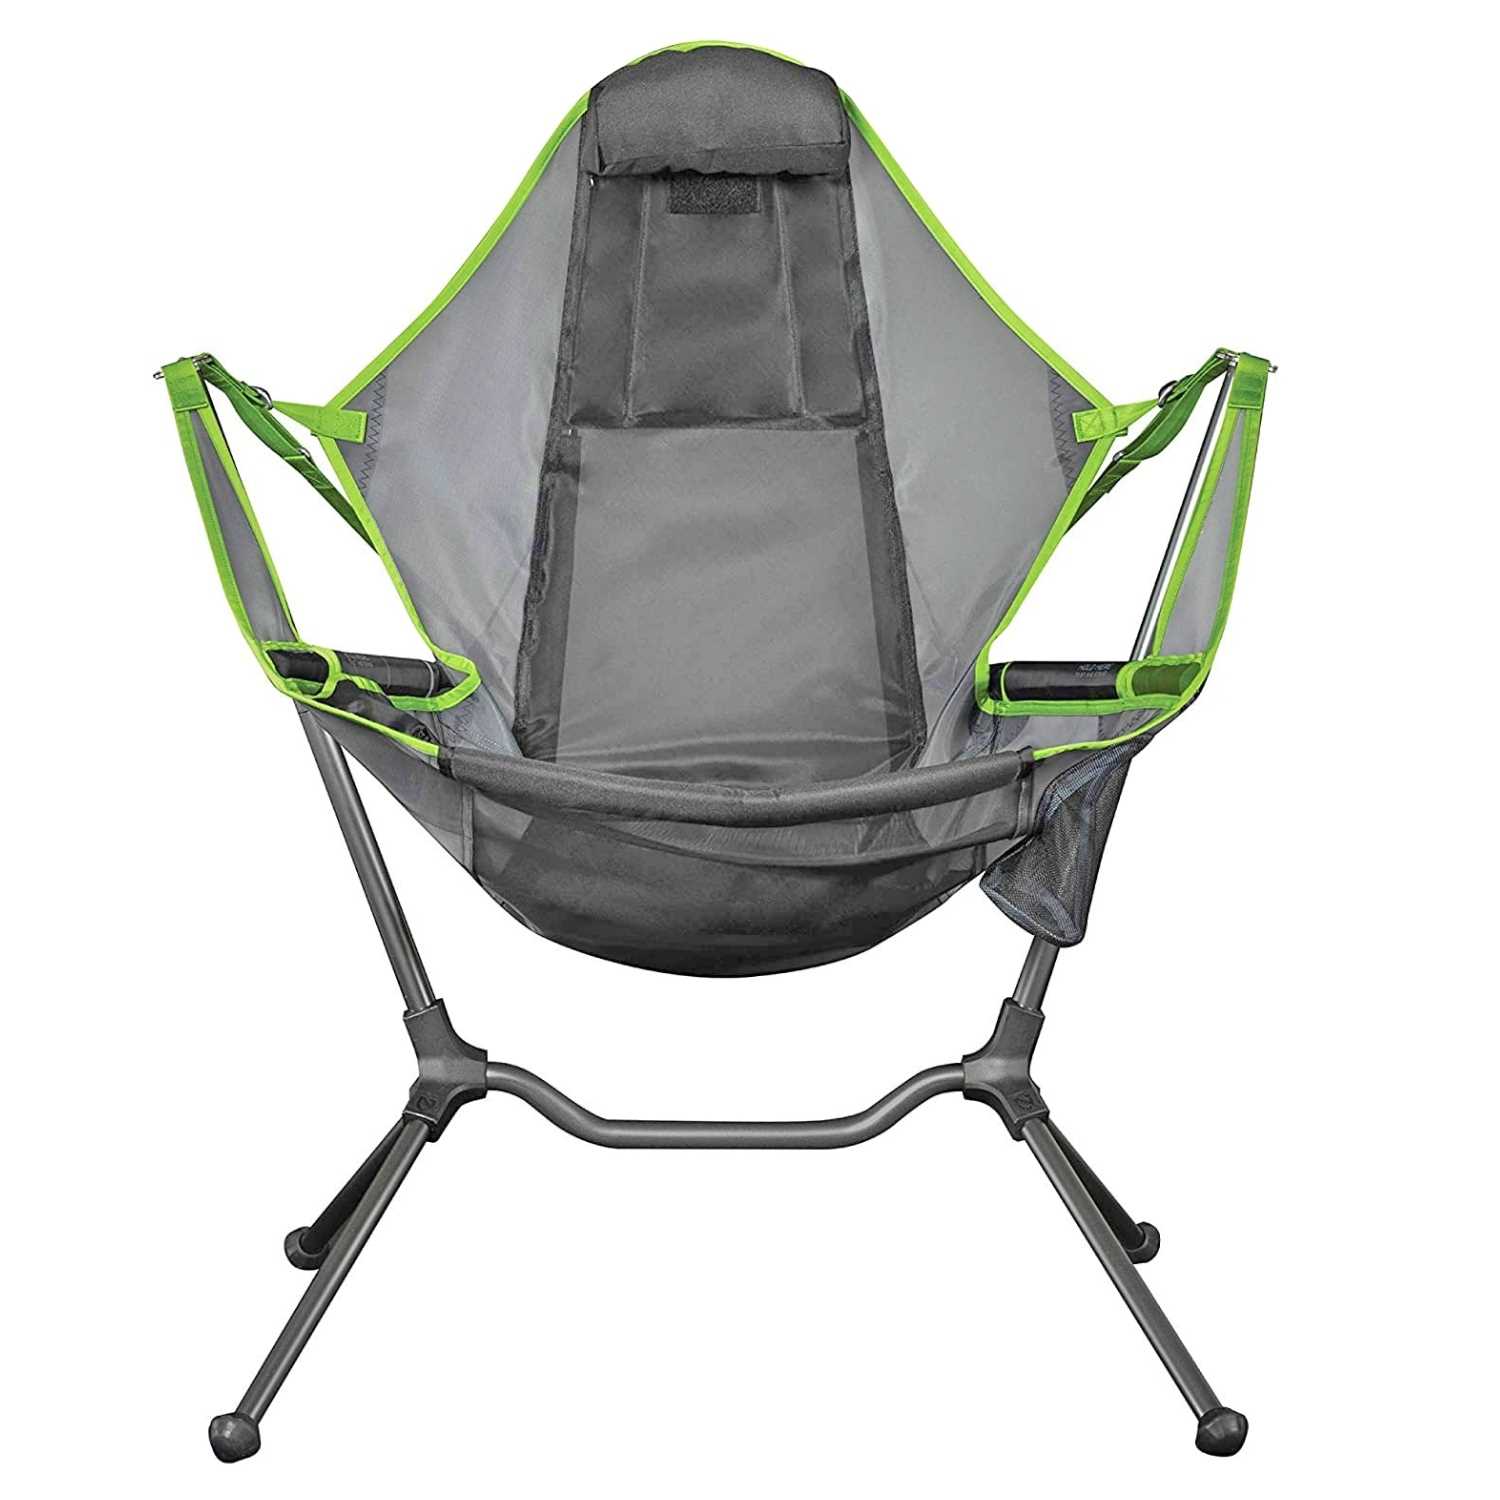 Hammock Swinging Luxury Camp Chair - Favorite Christmas Gifts For Him